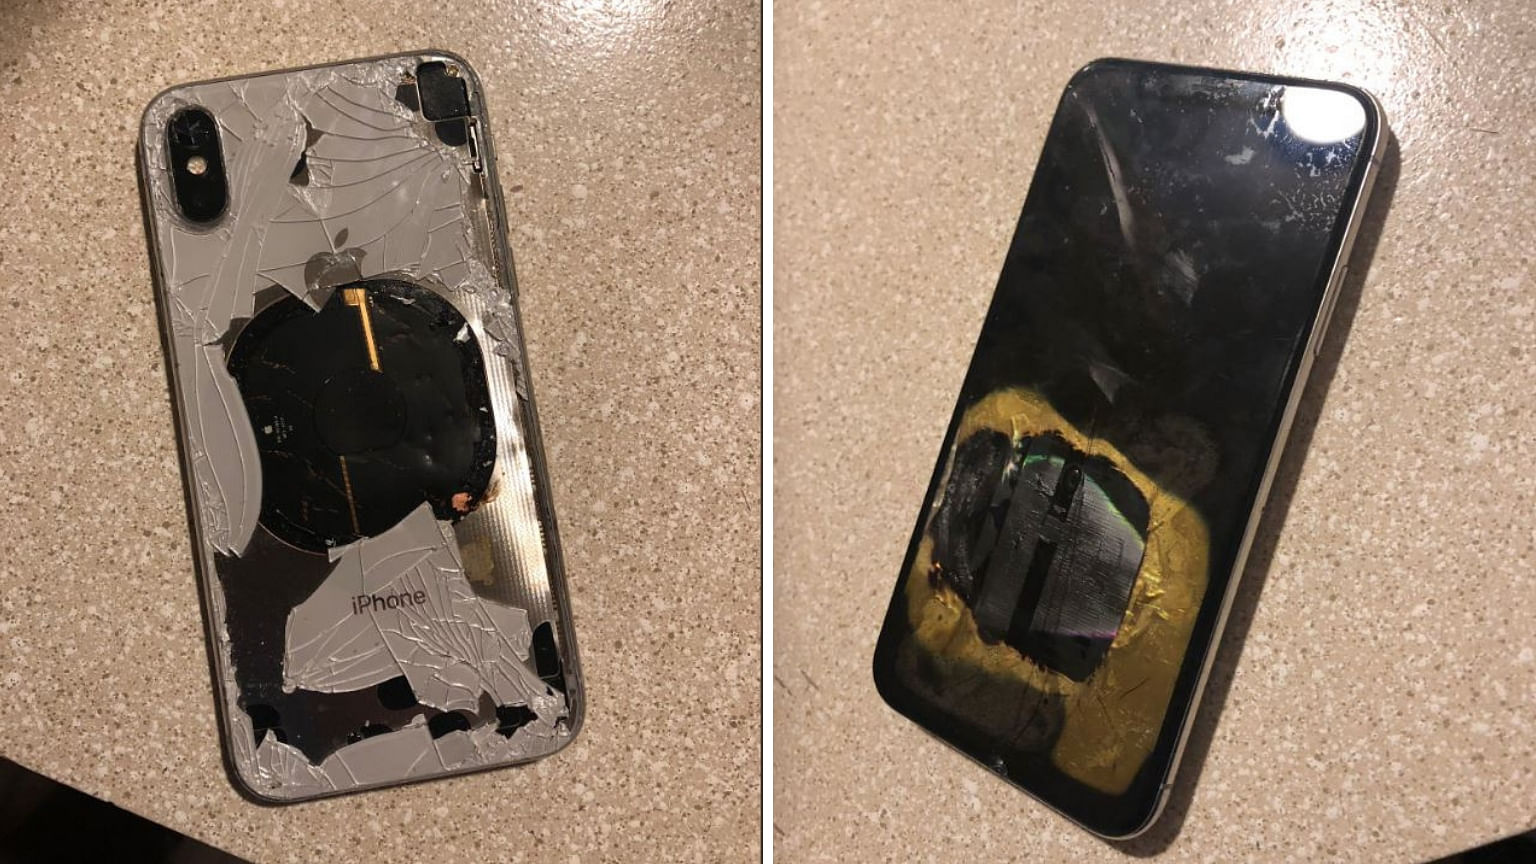 The phone exploded after the update. It was being charged with the Apple bundled charger.&nbsp;